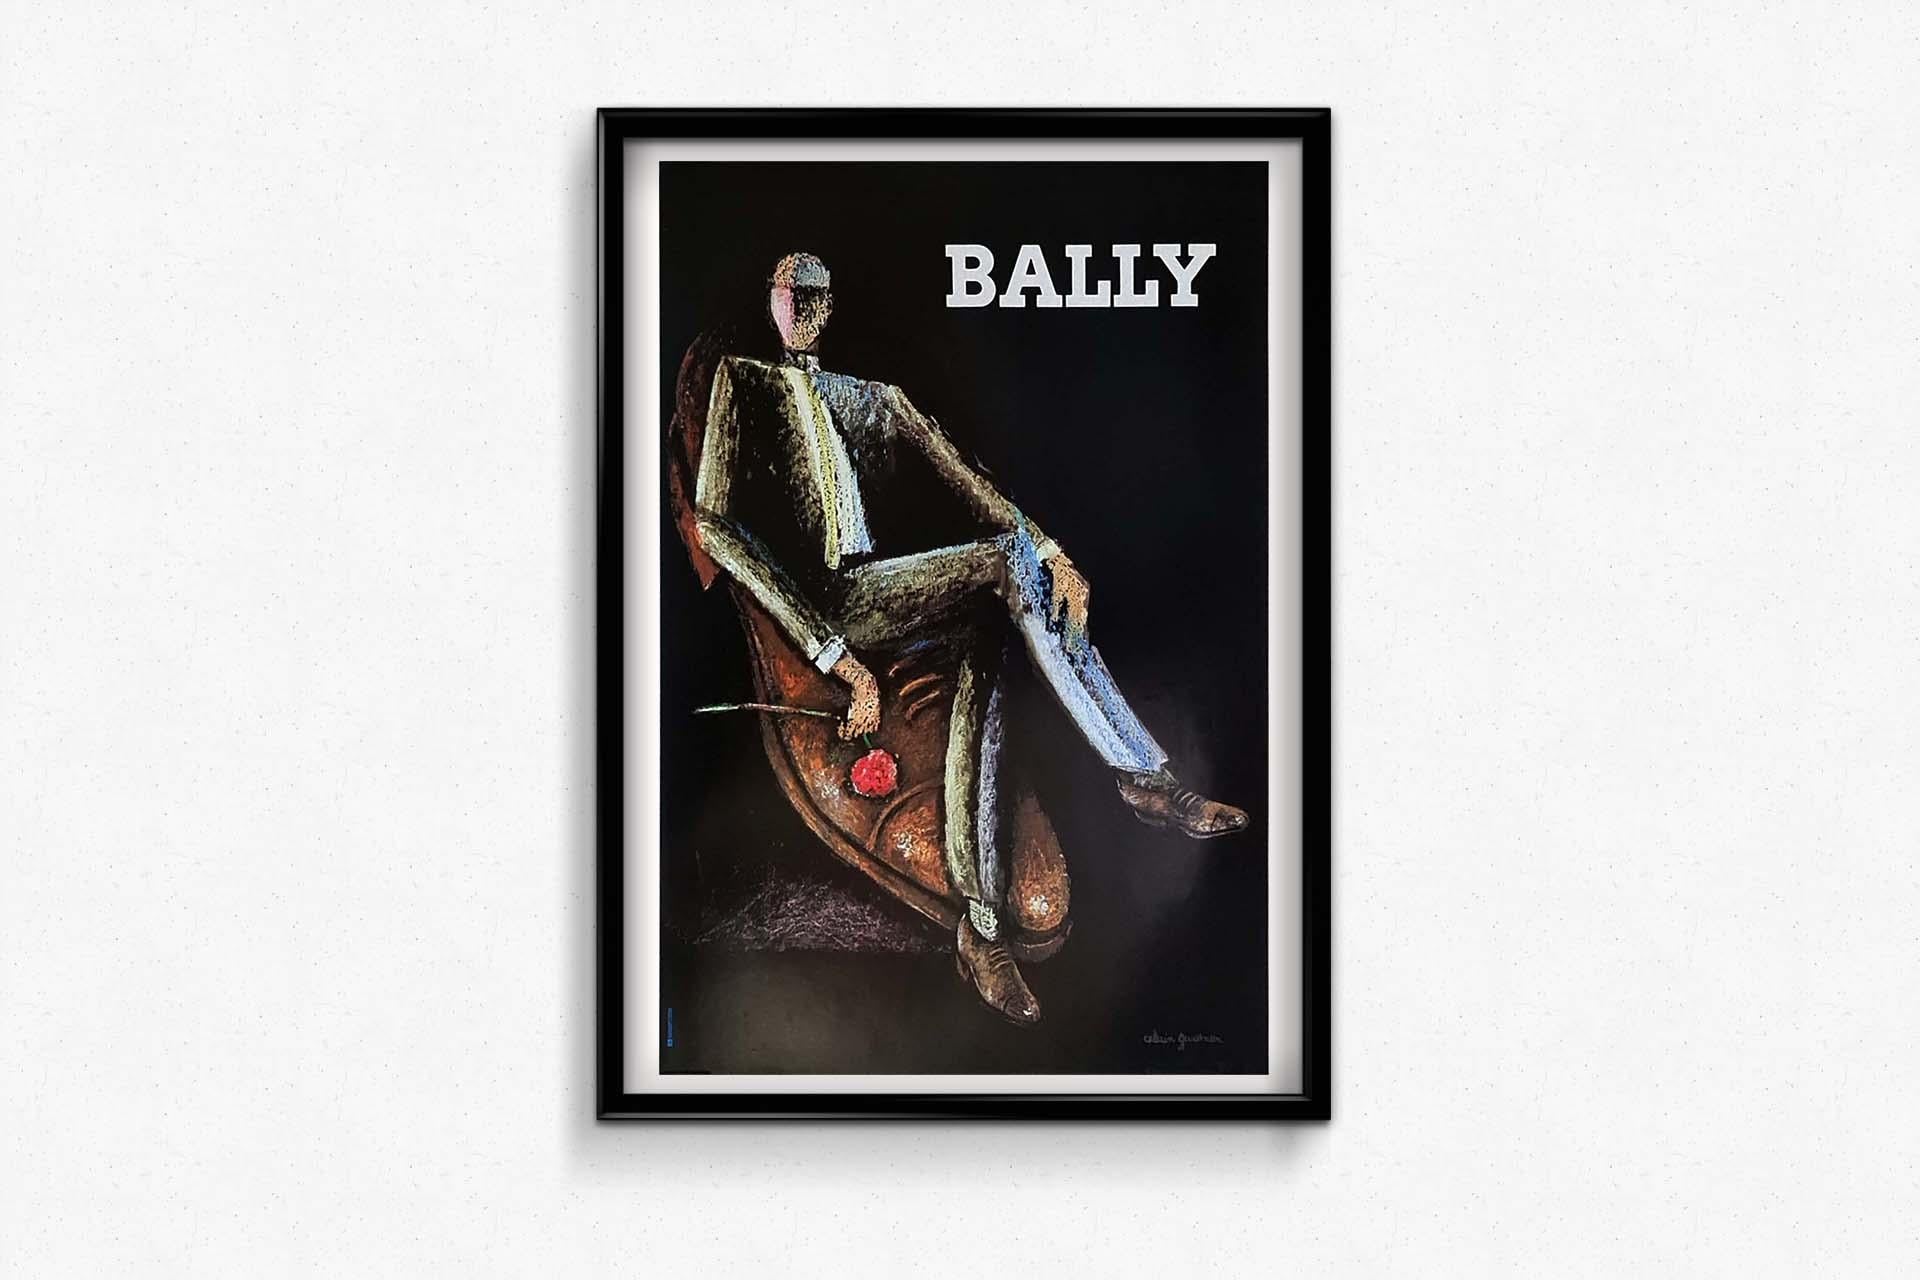 Beautiful original poster by Alain Gauthier for Bally men's shoes. Bally is a company founded as Bally & Co in 1851 by Carl Franz Bally (1821-1899) and his brother Fritz in the basement of the family home in Schönenwerd (Solothurn), Switzerland.